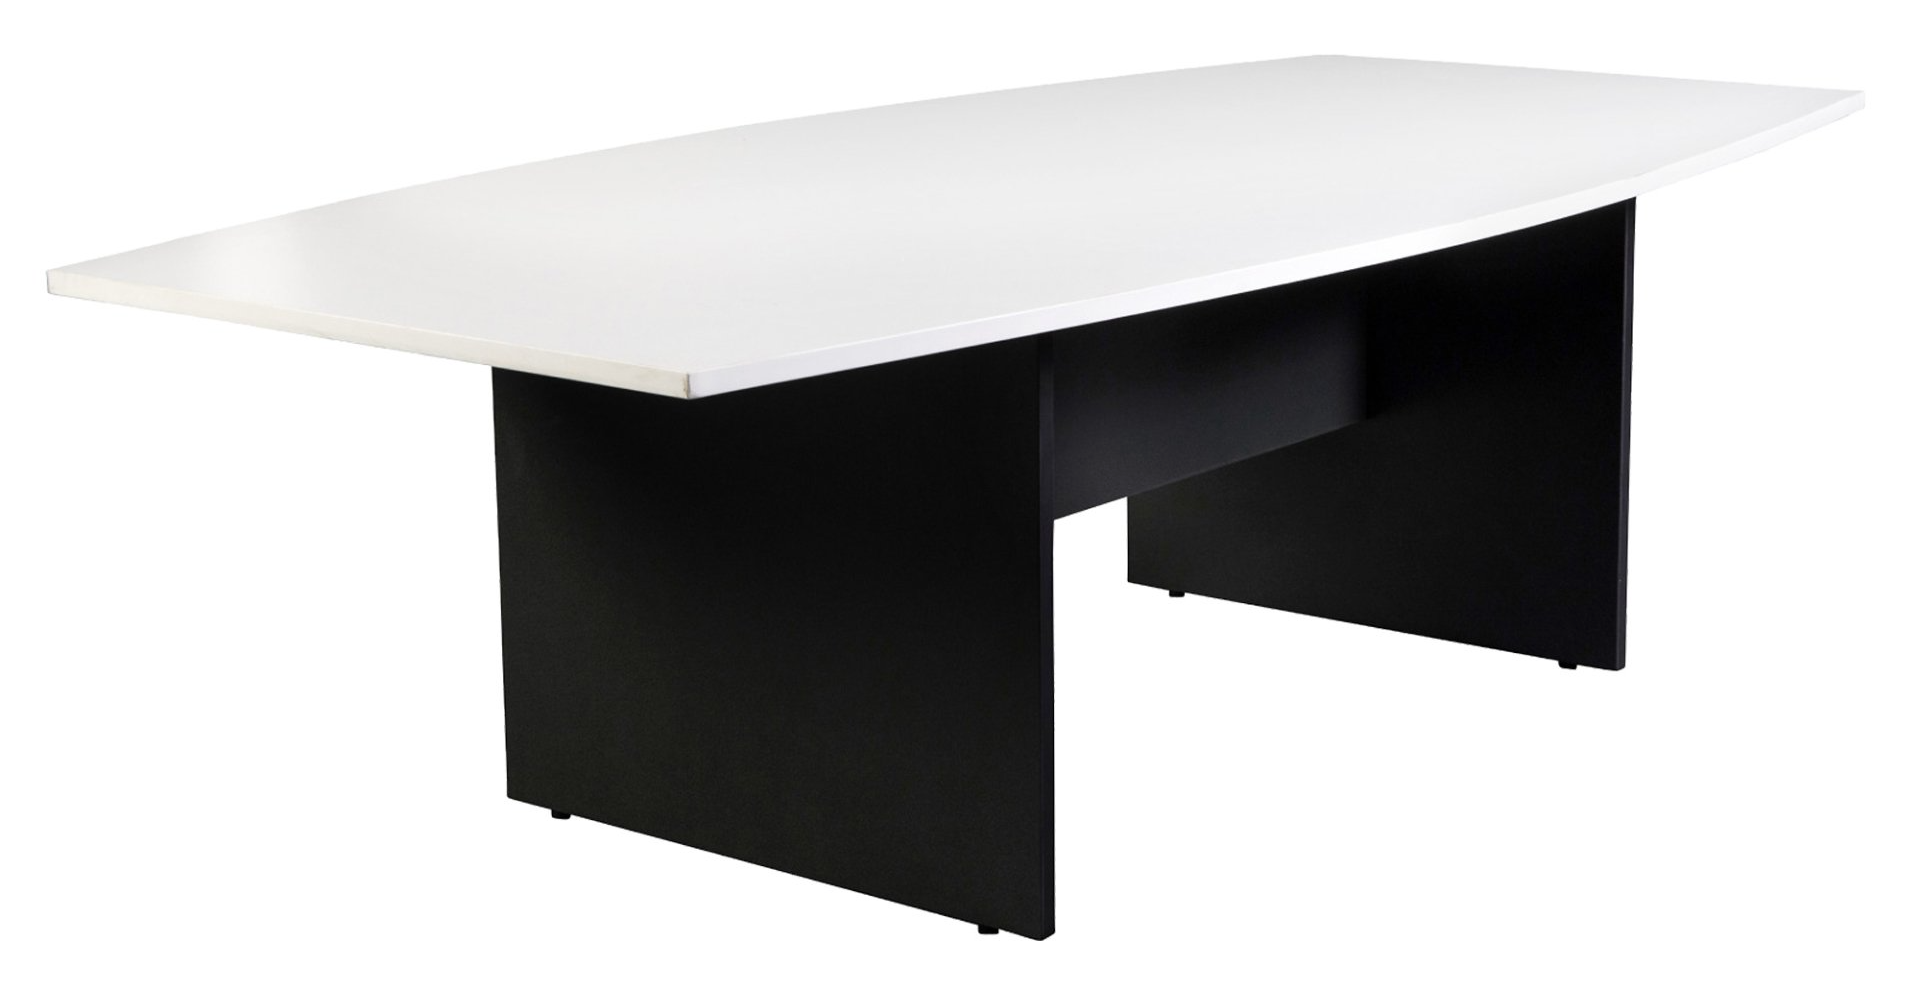 h-base boat-shaped boardroom table white